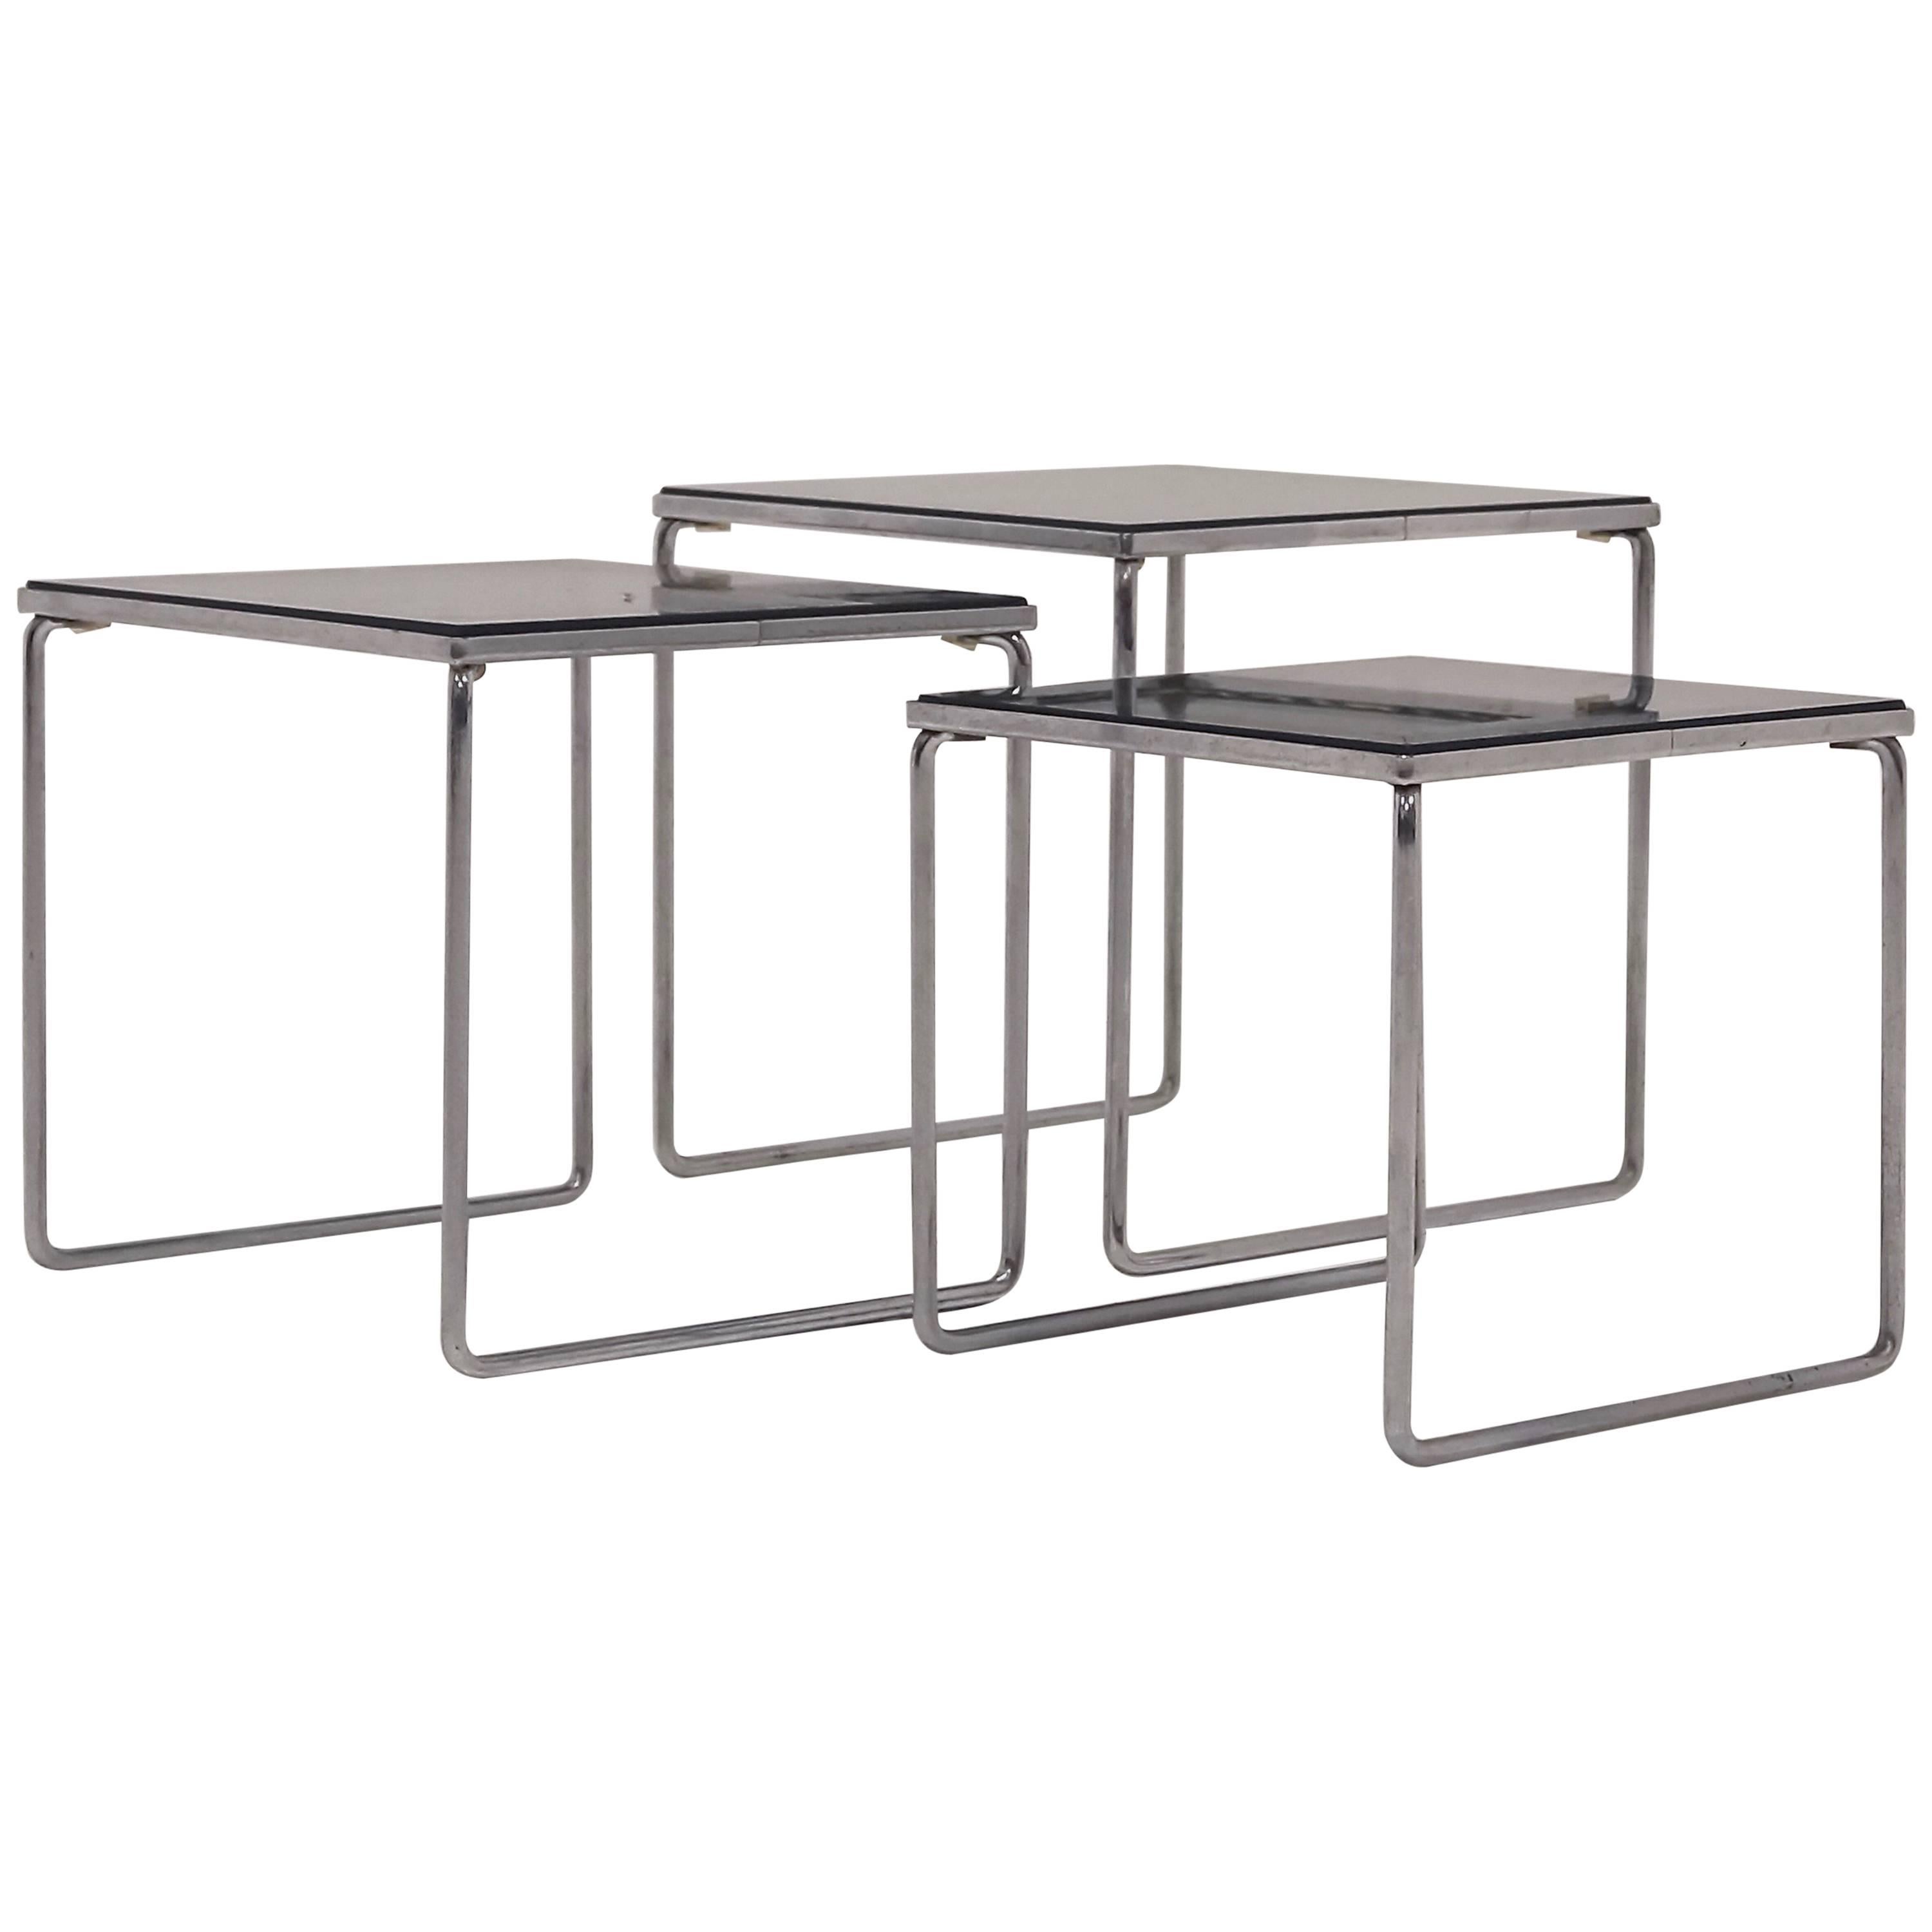 Set of Milo Baughman Style Chrome and Smoked Glass Nesting Tables For Sale